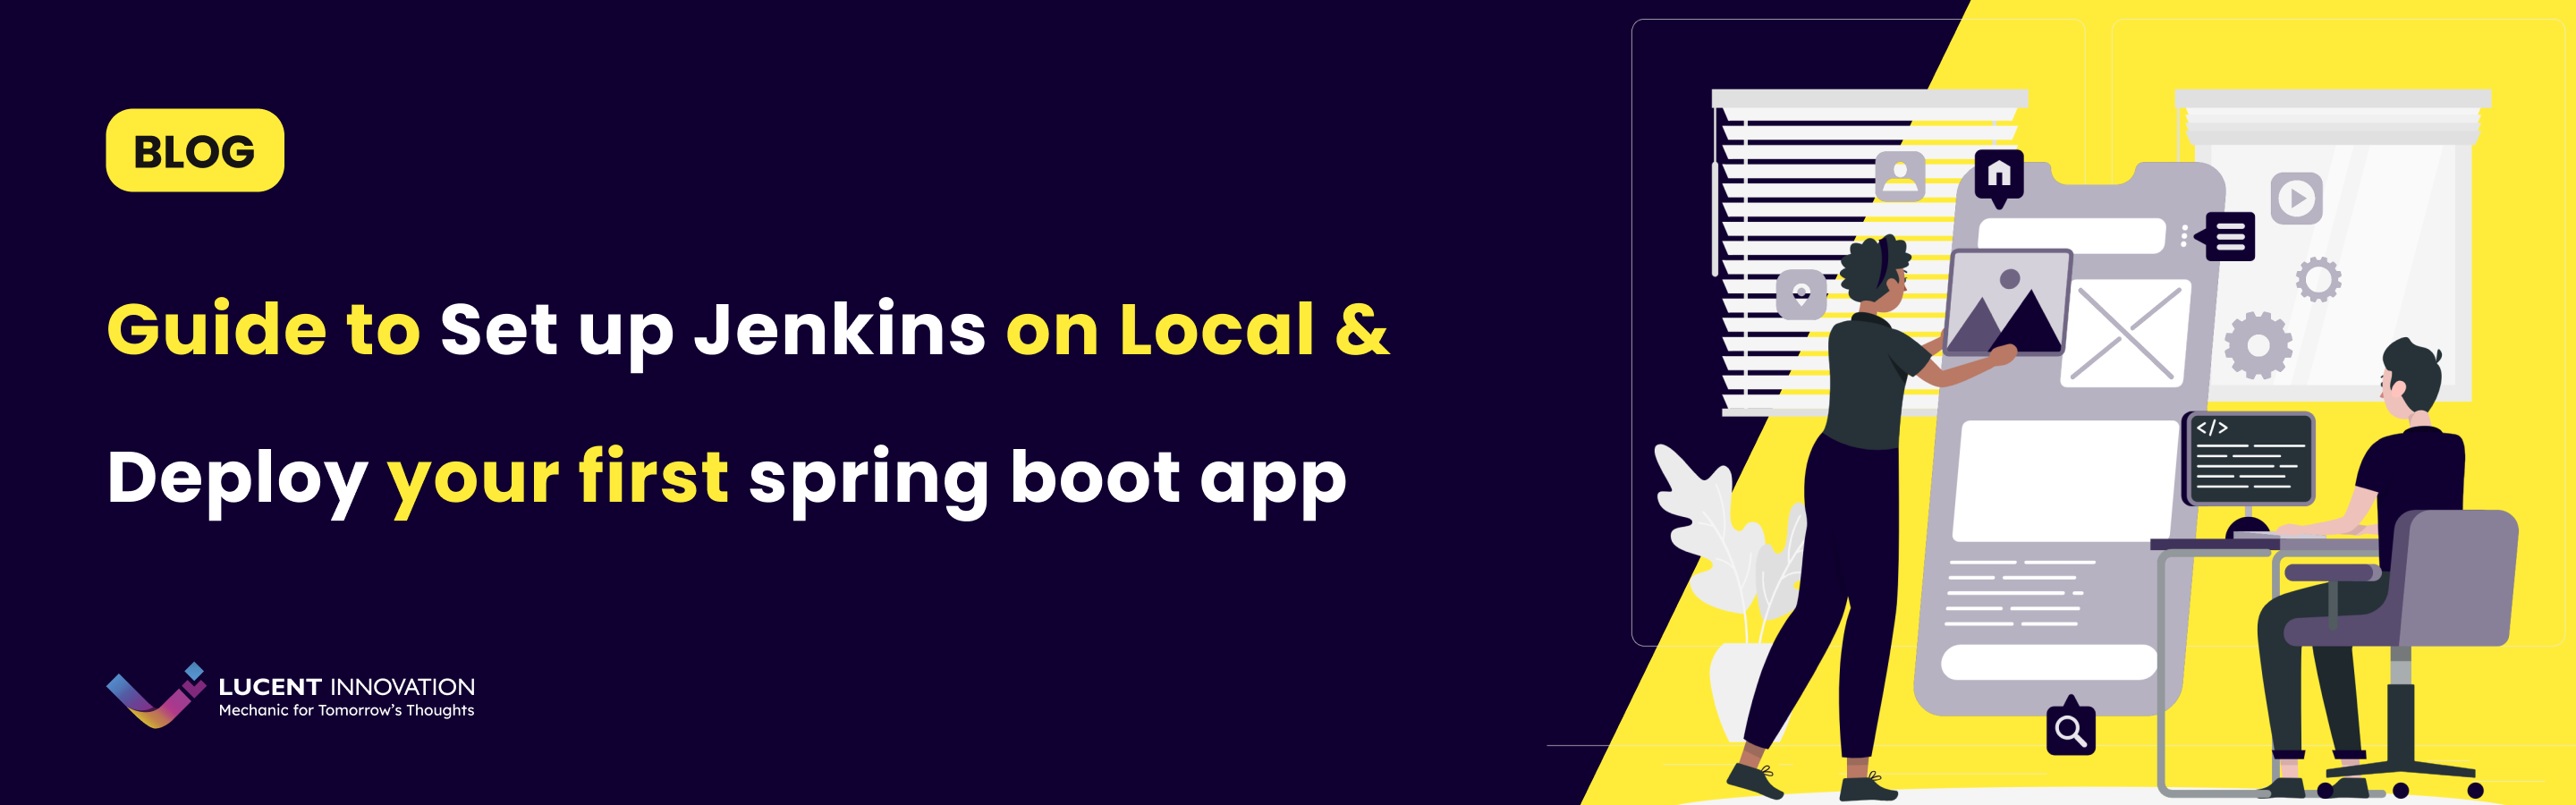 Guide to Set up Jenkins on Local & Deploy Your First Spring Boot App